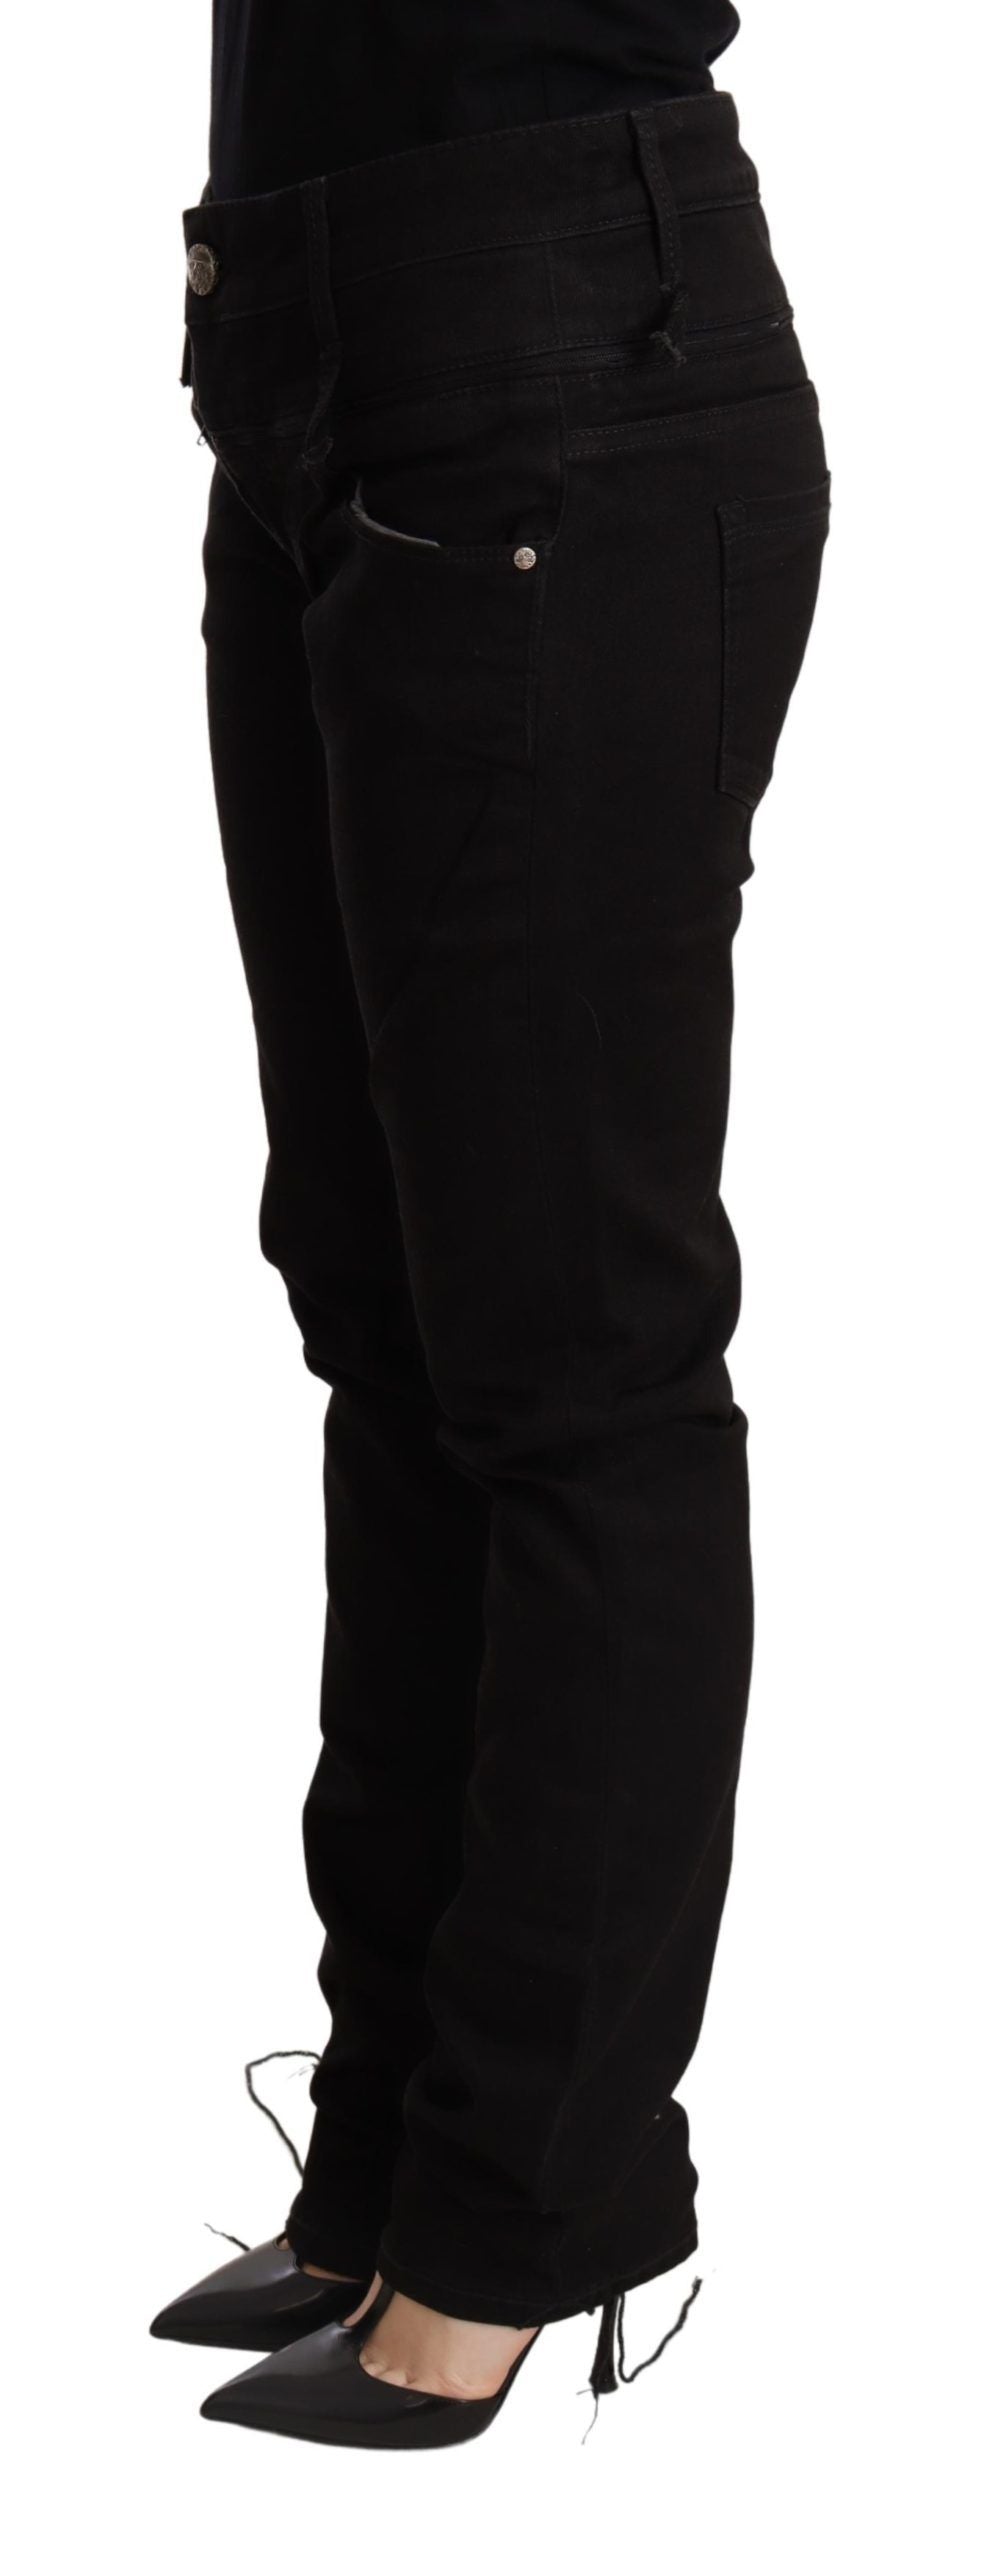 Black Low Waist Skinny Denim Jeans Trouser - Designed by Acht Available to Buy at a Discounted Price on Moon Behind The Hill Online Designer Discount Store